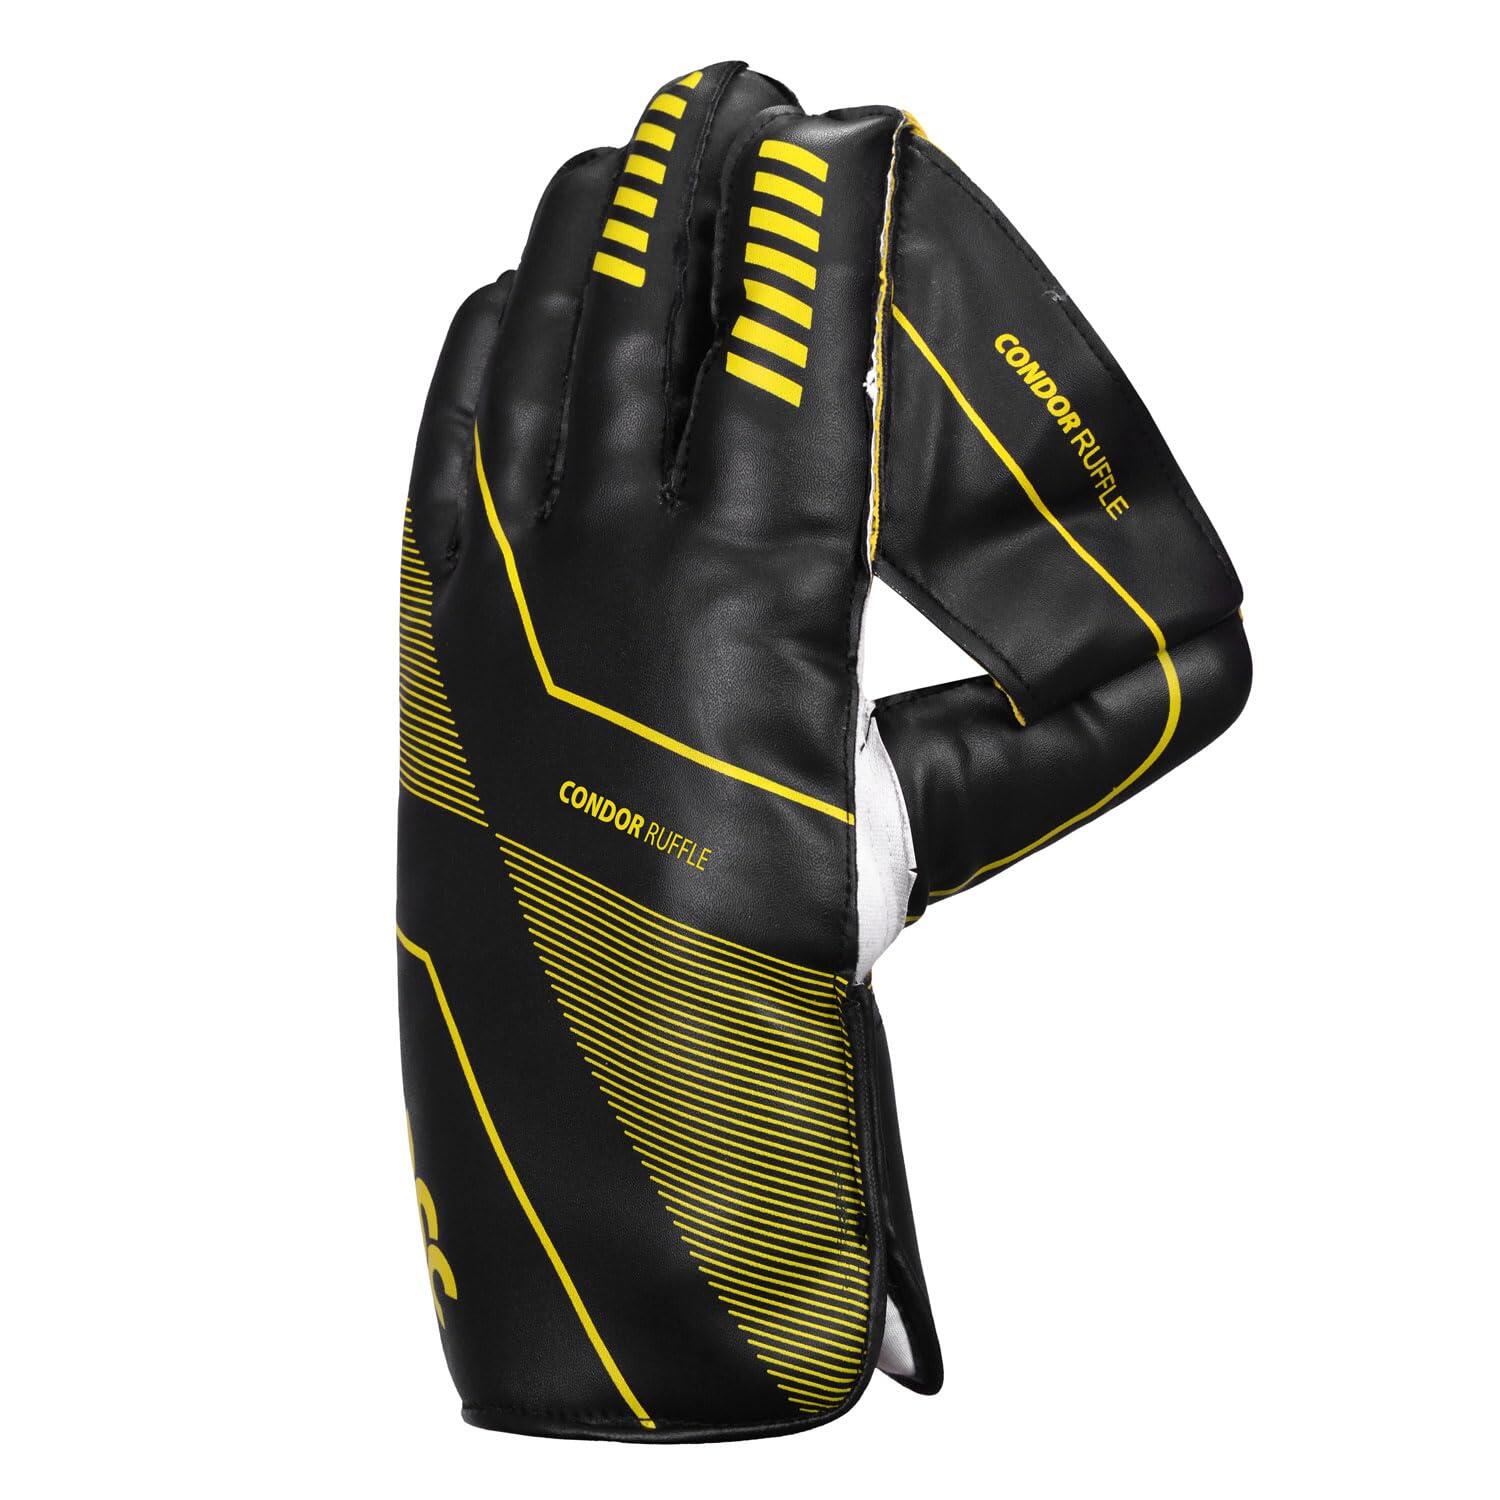 DSC Condor Ruffle Cricket Wicket Keeping Gloves | Material- Leather Ruffle 1/5